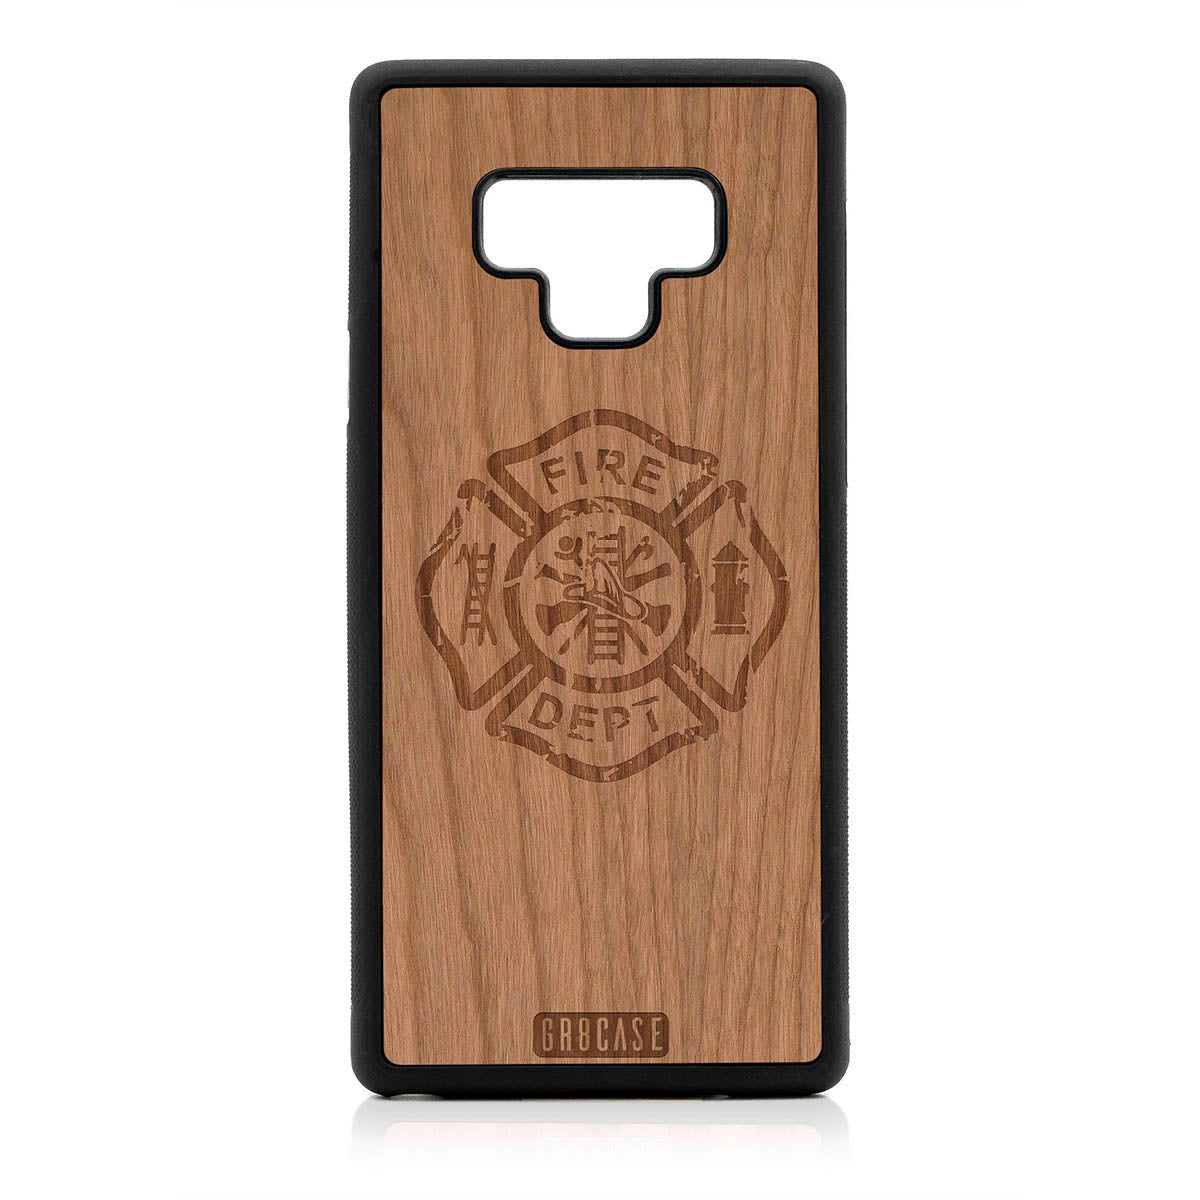 Fire Department Design Wood Case Samsung Galaxy Note 9 by GR8CASE